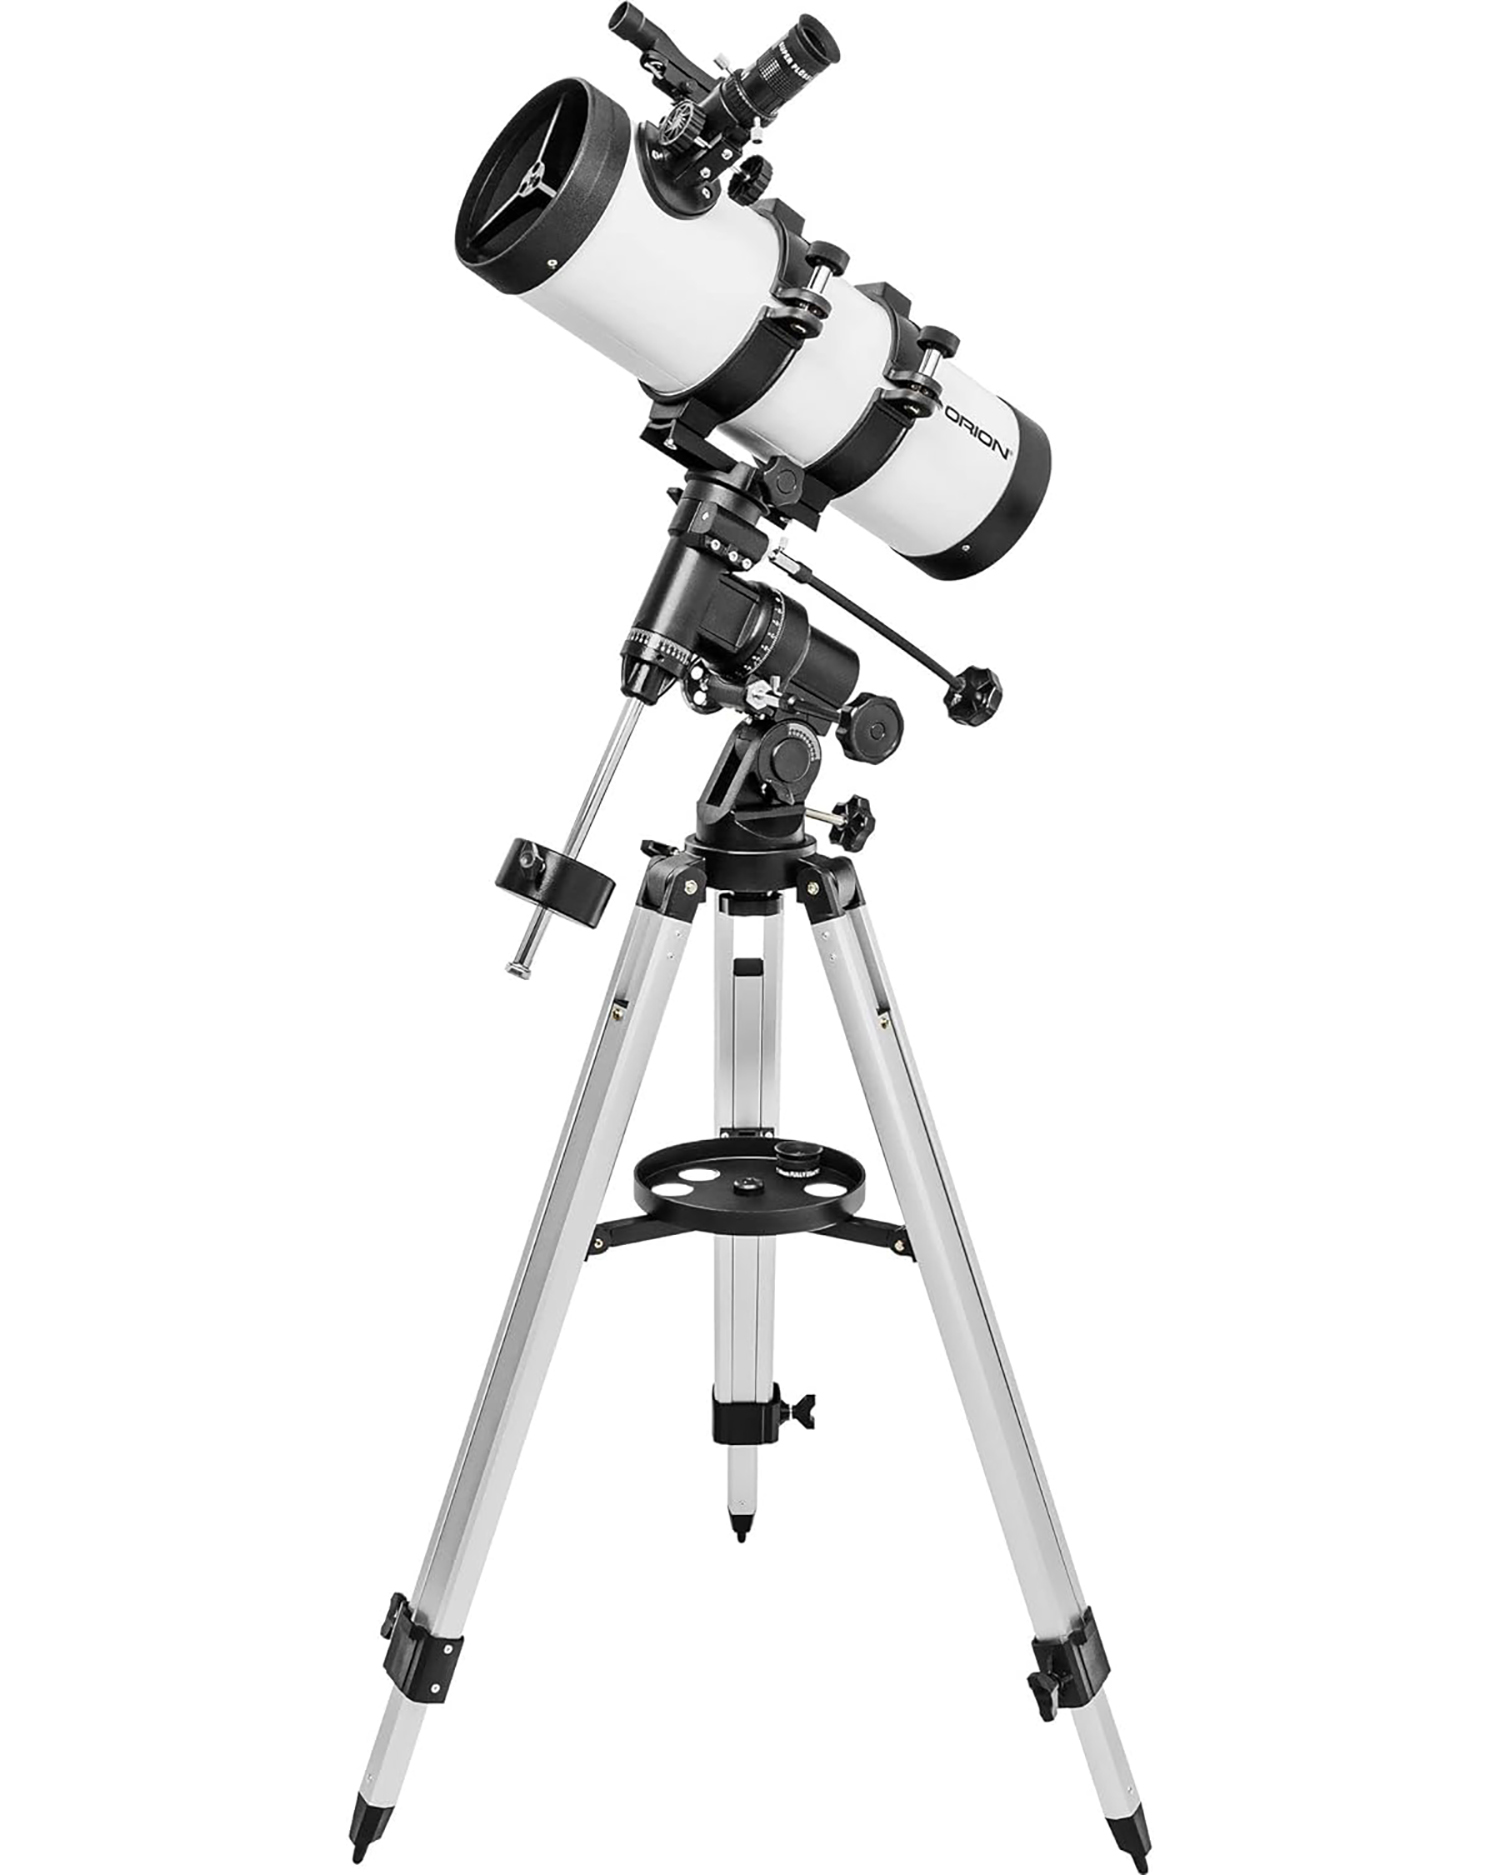 Orion Observer 114mm Equatorial Reflector Telescope for Adults & Families - Quality Telescope for Astronomy Beginners to View Moon, Planets & Stars